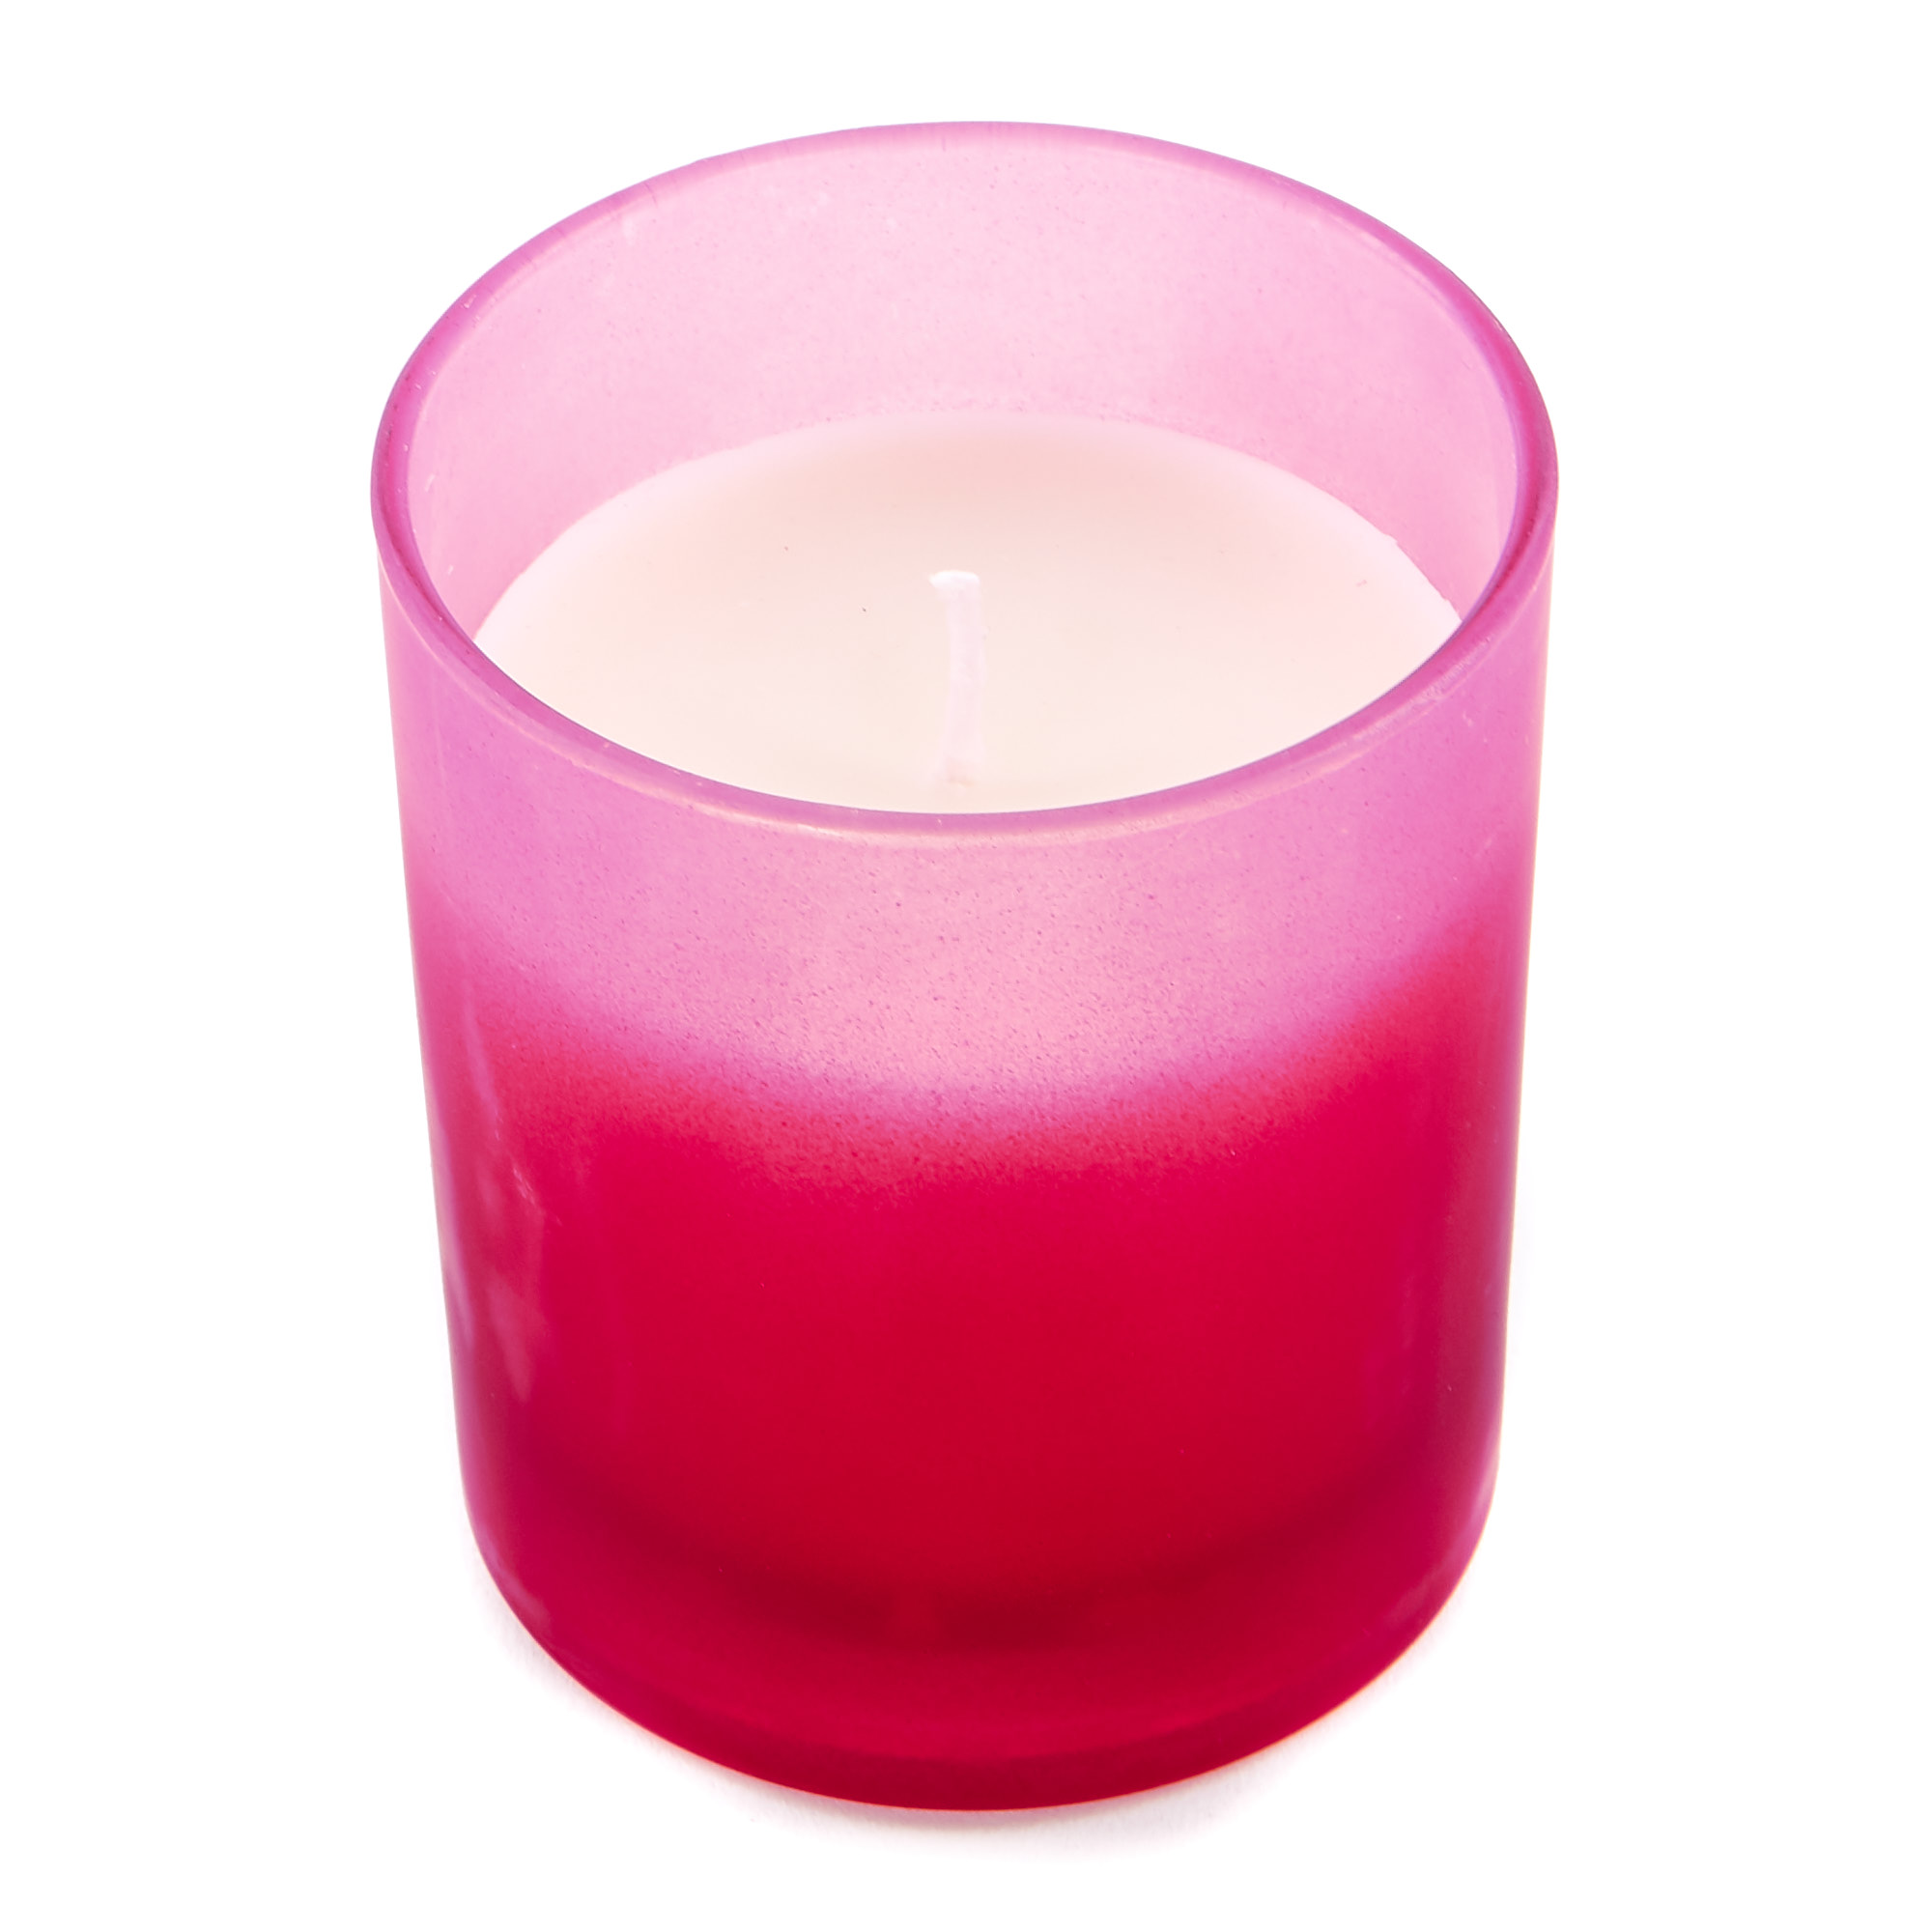 Vanilla Scented Candle - Girlfriend